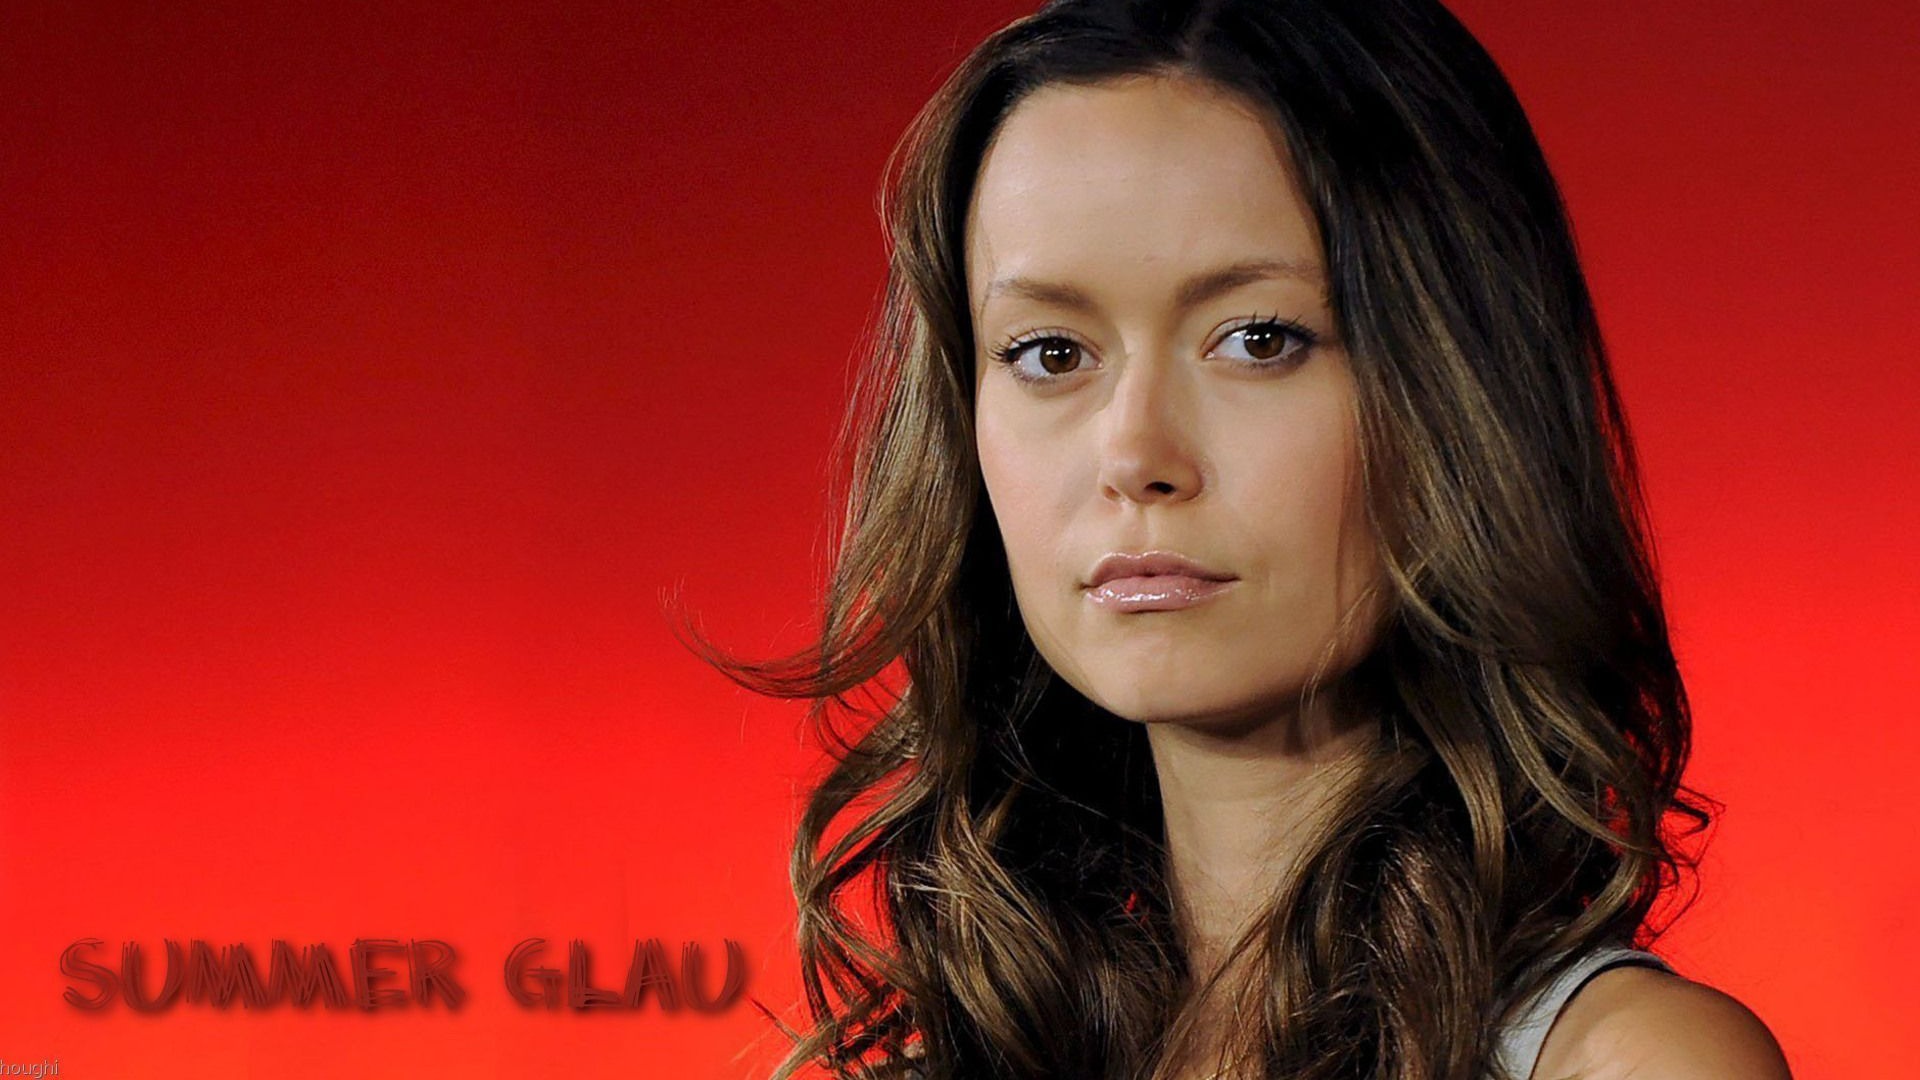 Summer Glau #014 - 1920x1080 Wallpapers Pictures Photos Images